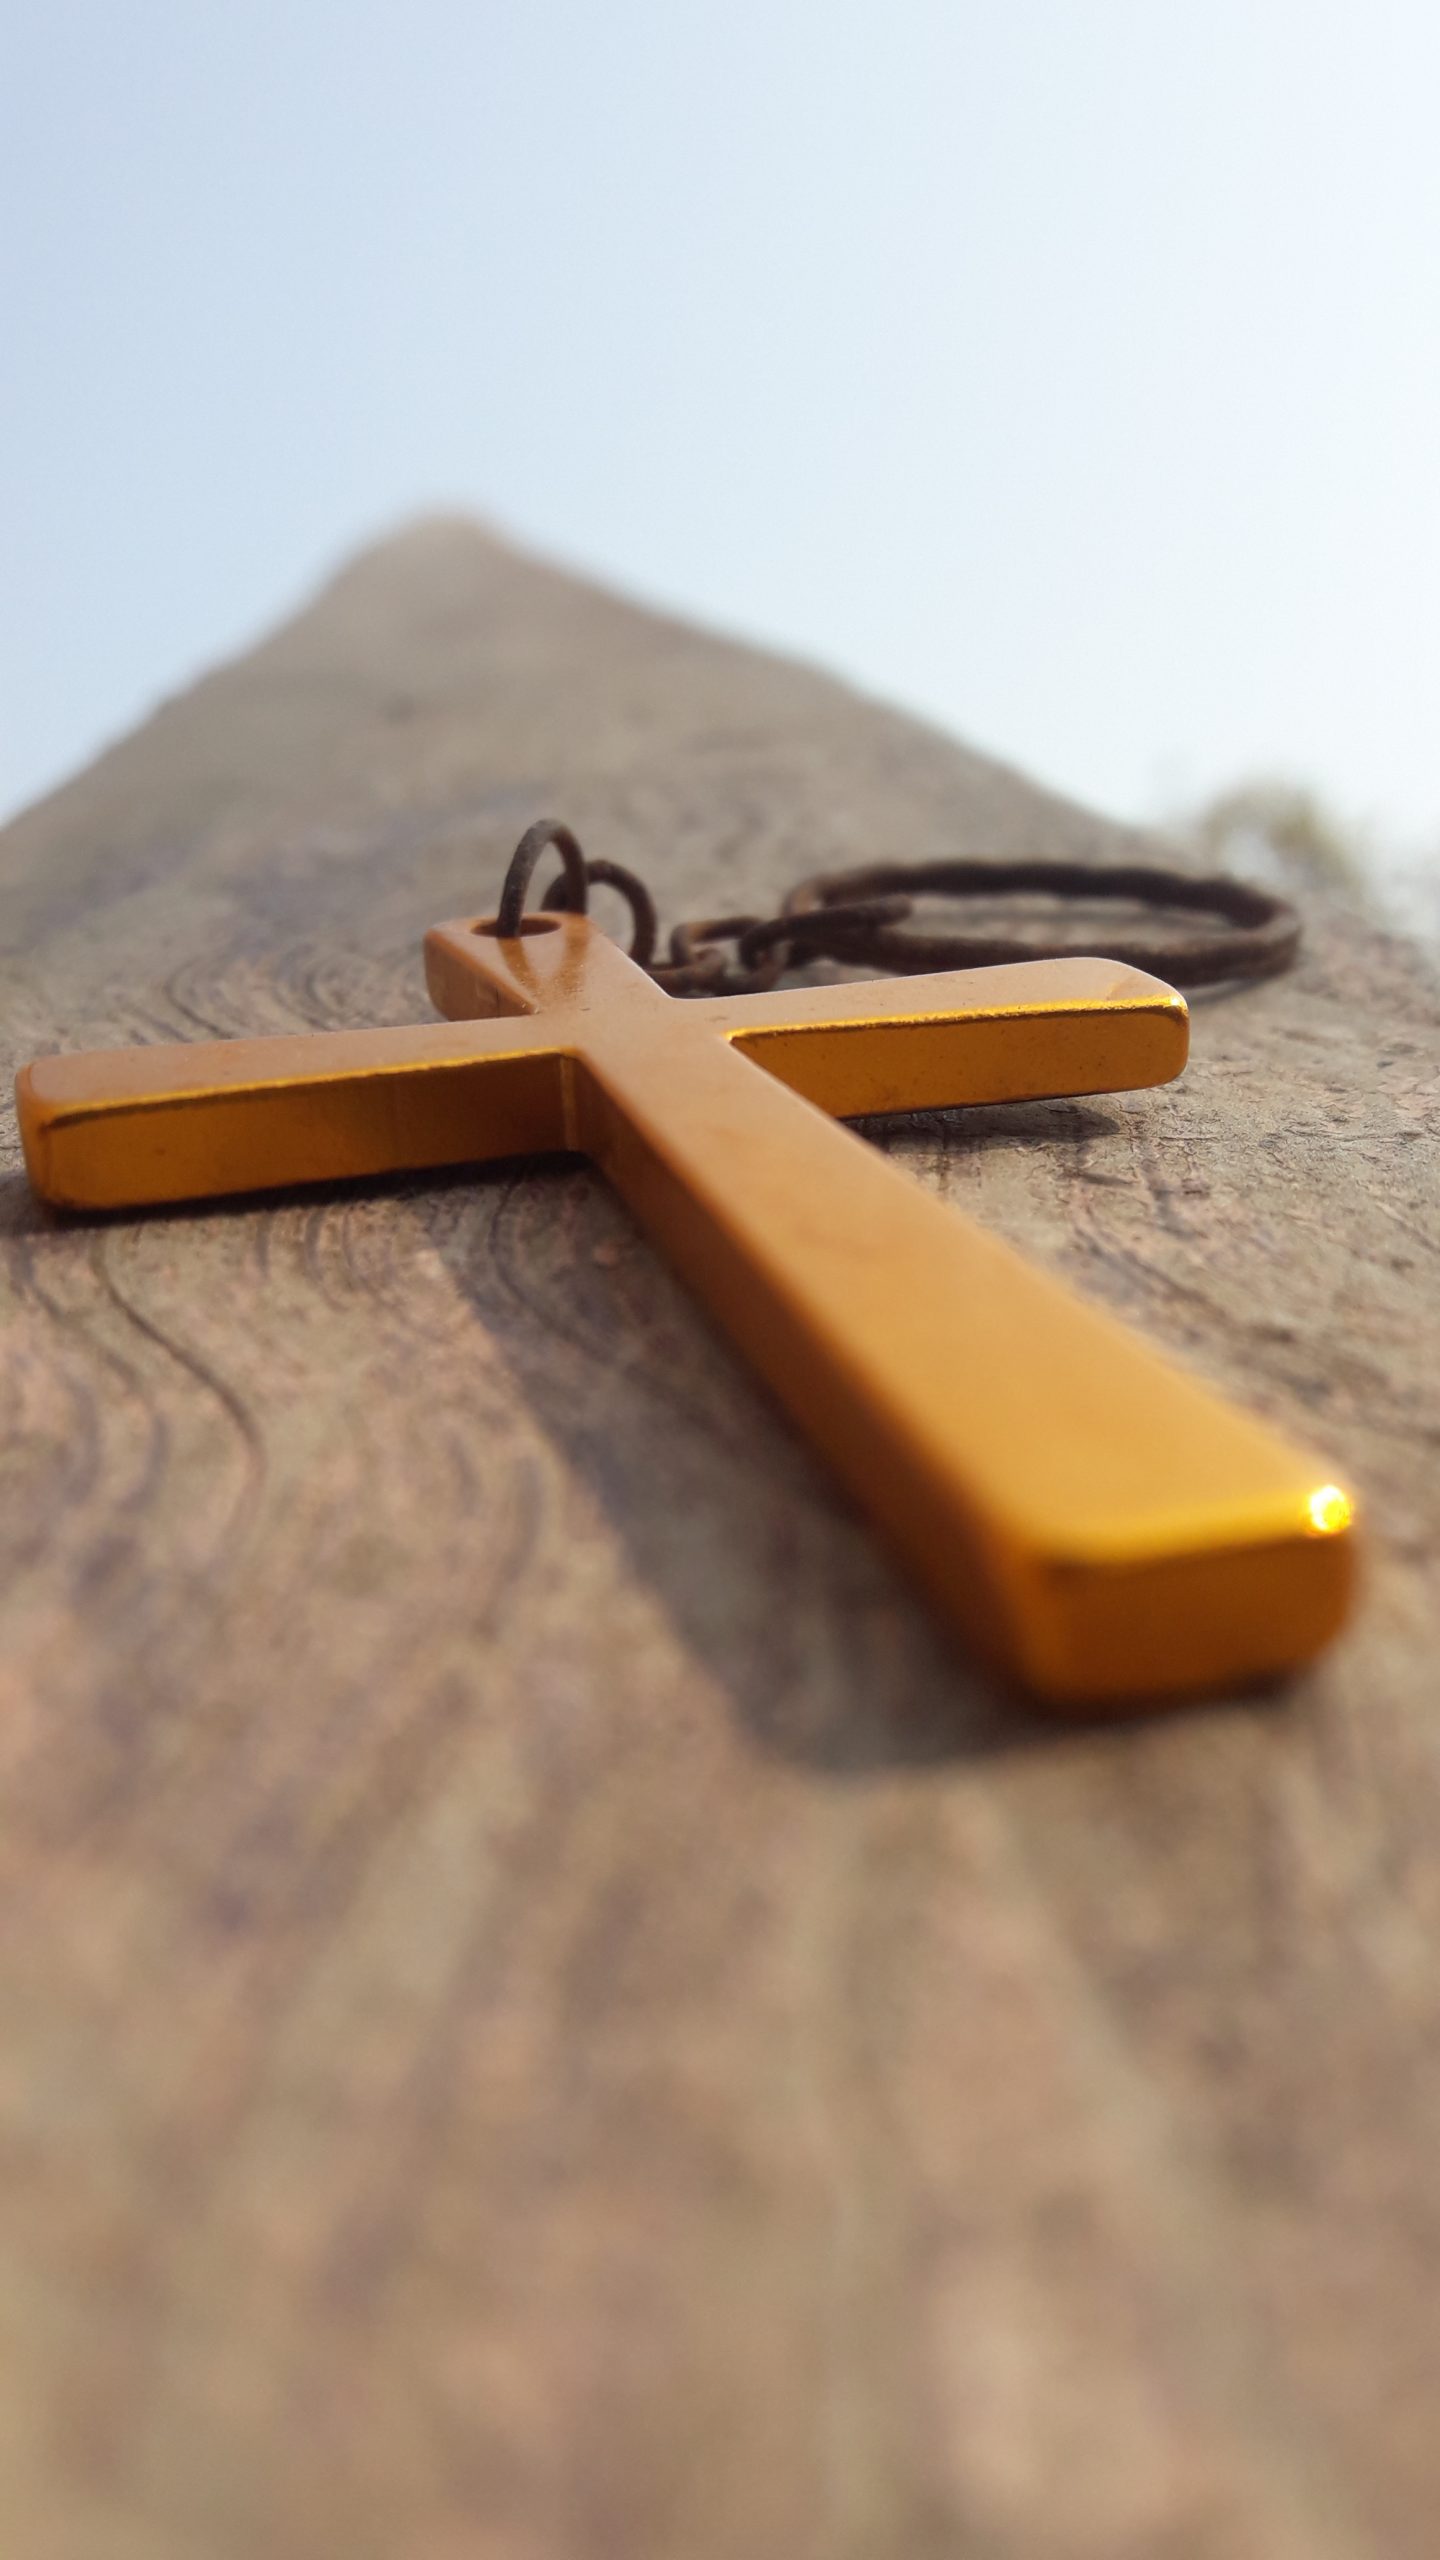 Cross sign key chain on the rock